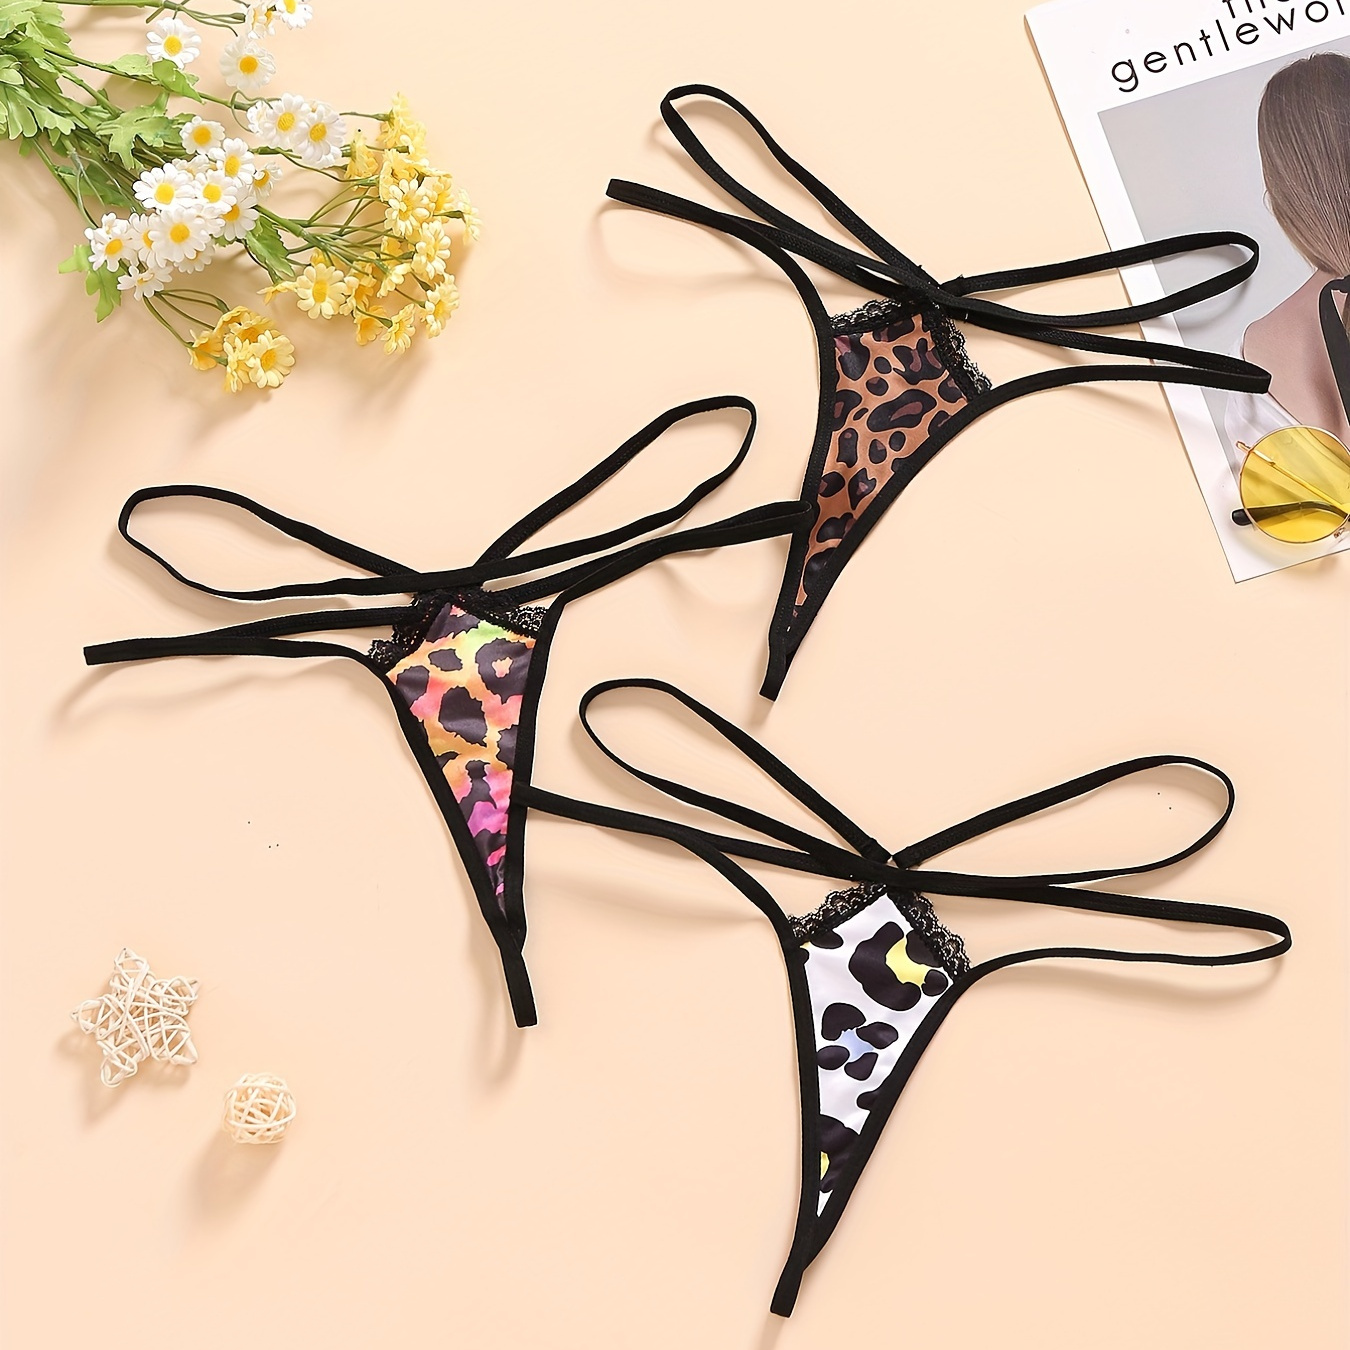 

3pcs Women's Leopard Lace Trim Thongs - Sultry Hollow Out Double Ribbon Panties For Sexy Lingerie & Underwear